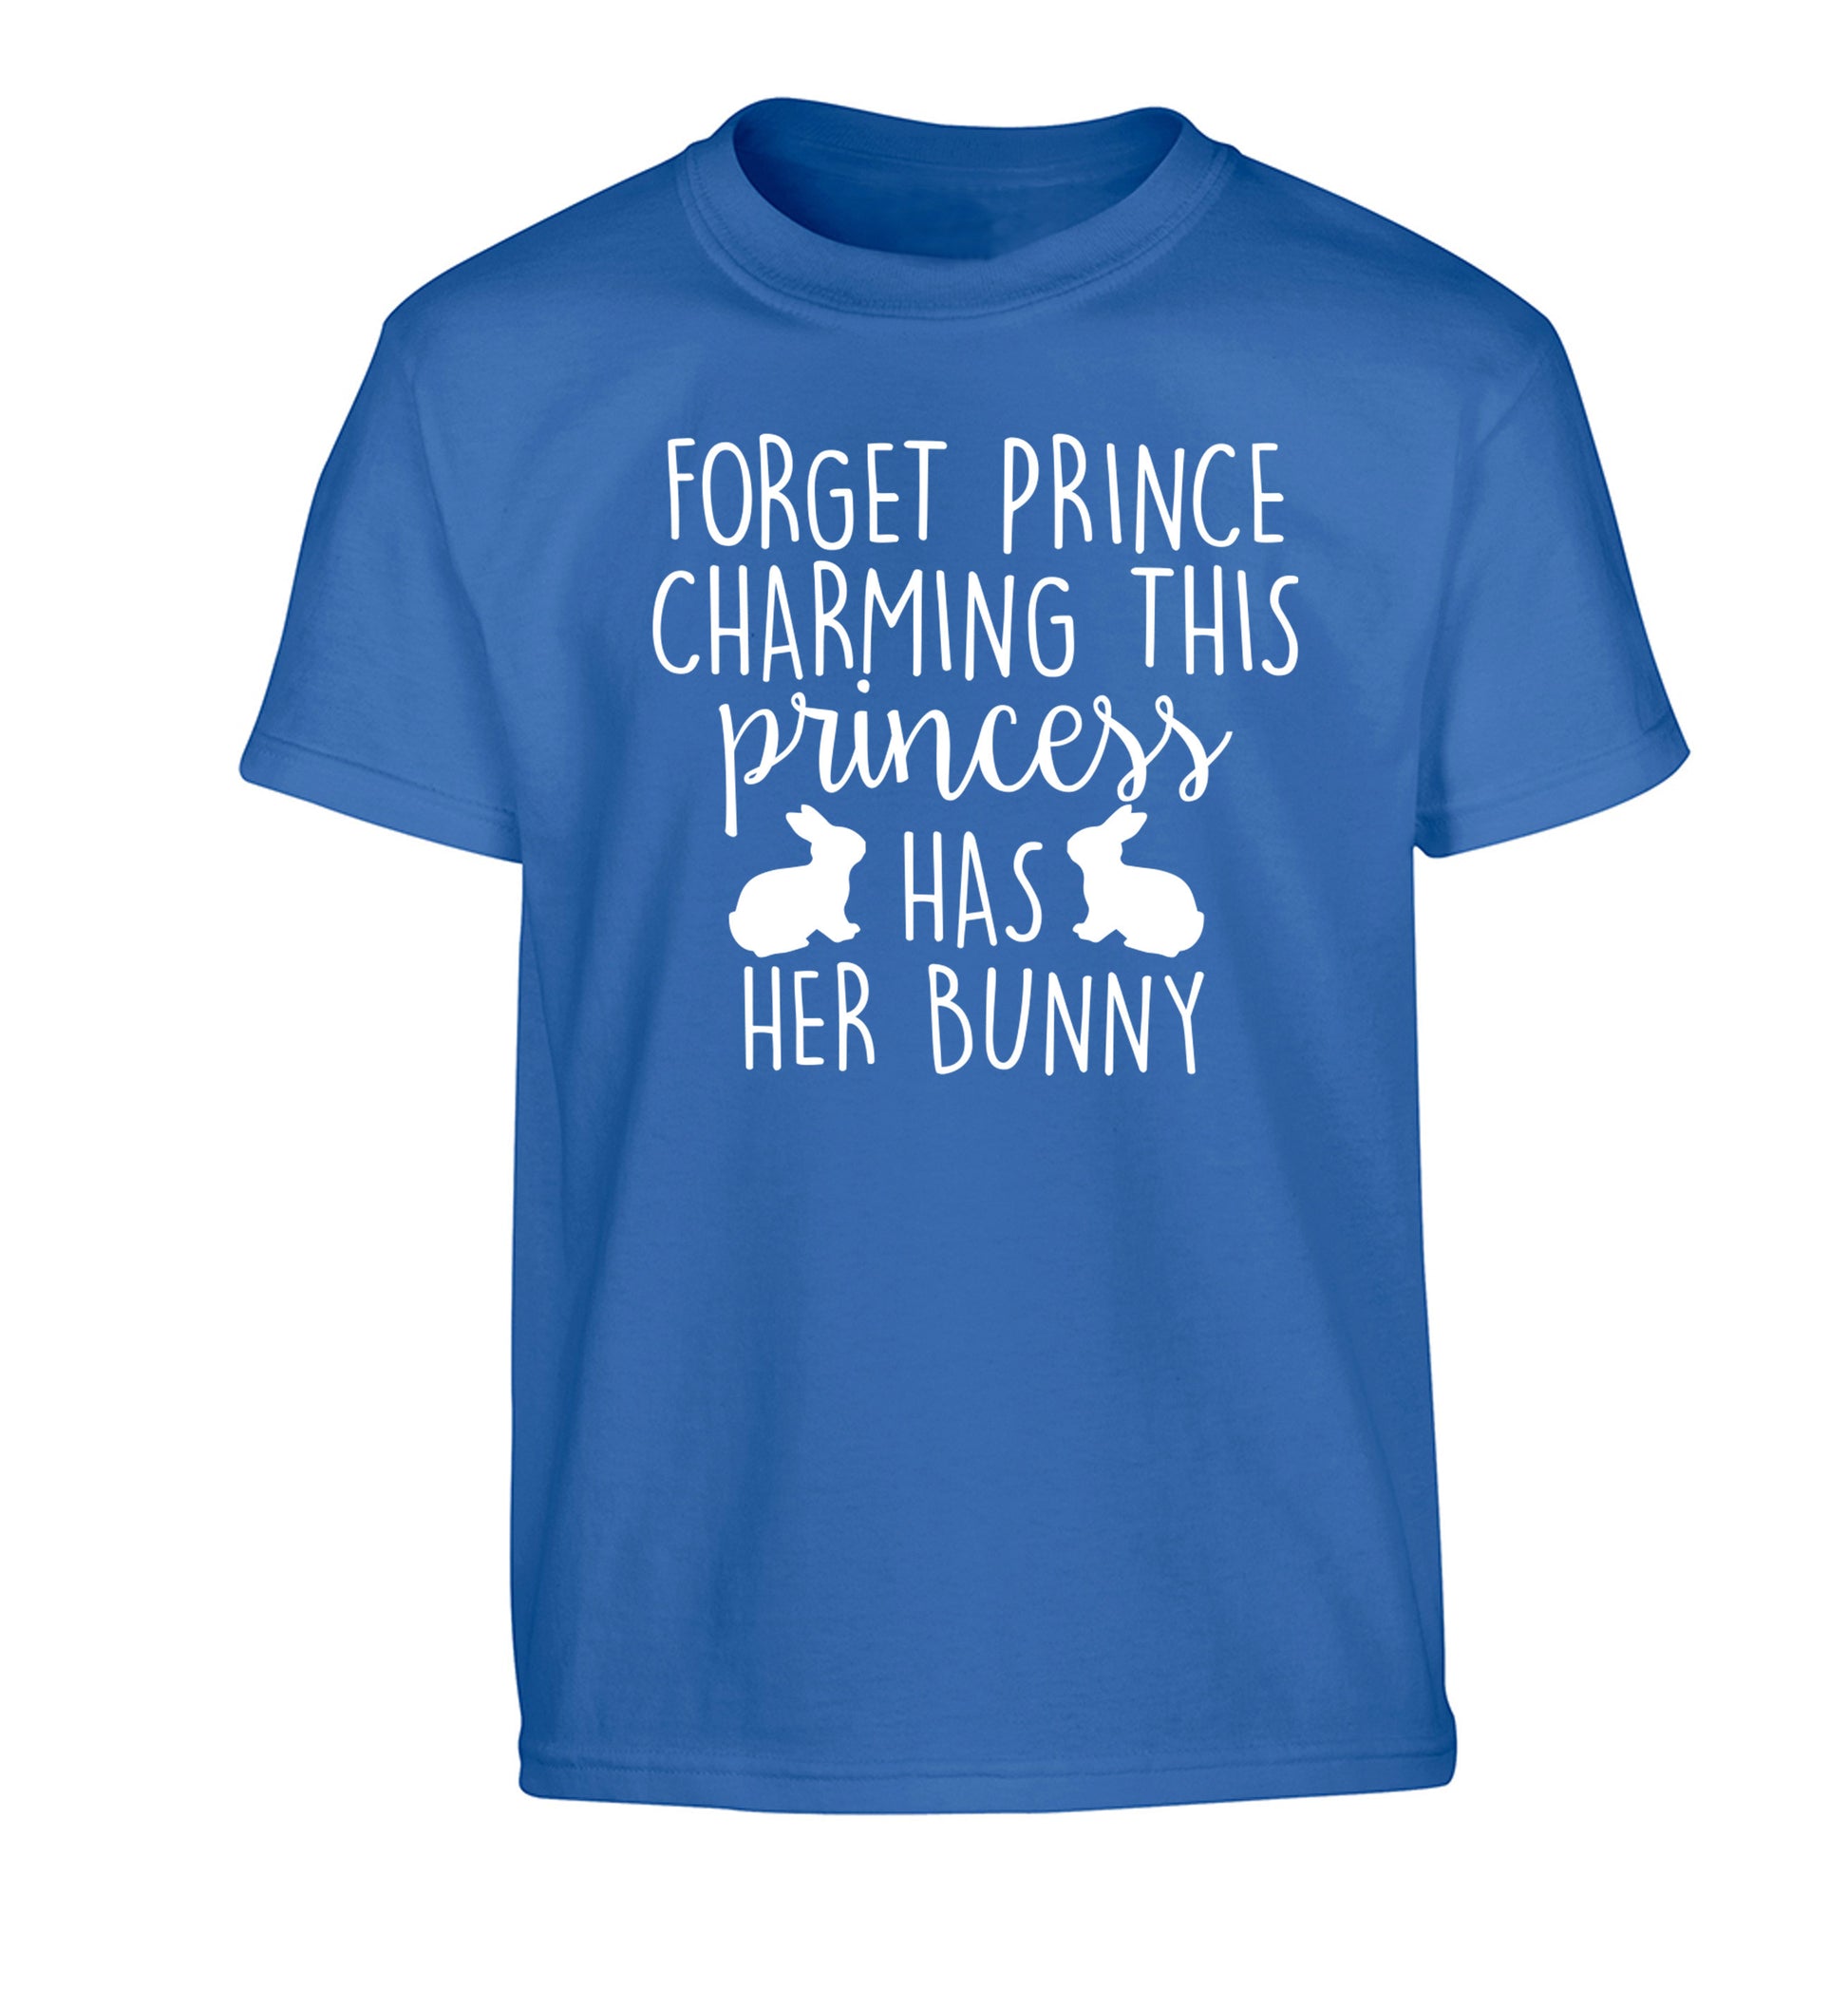 Forget prince charming this princess has her bunny Children's blue Tshirt 12-14 Years